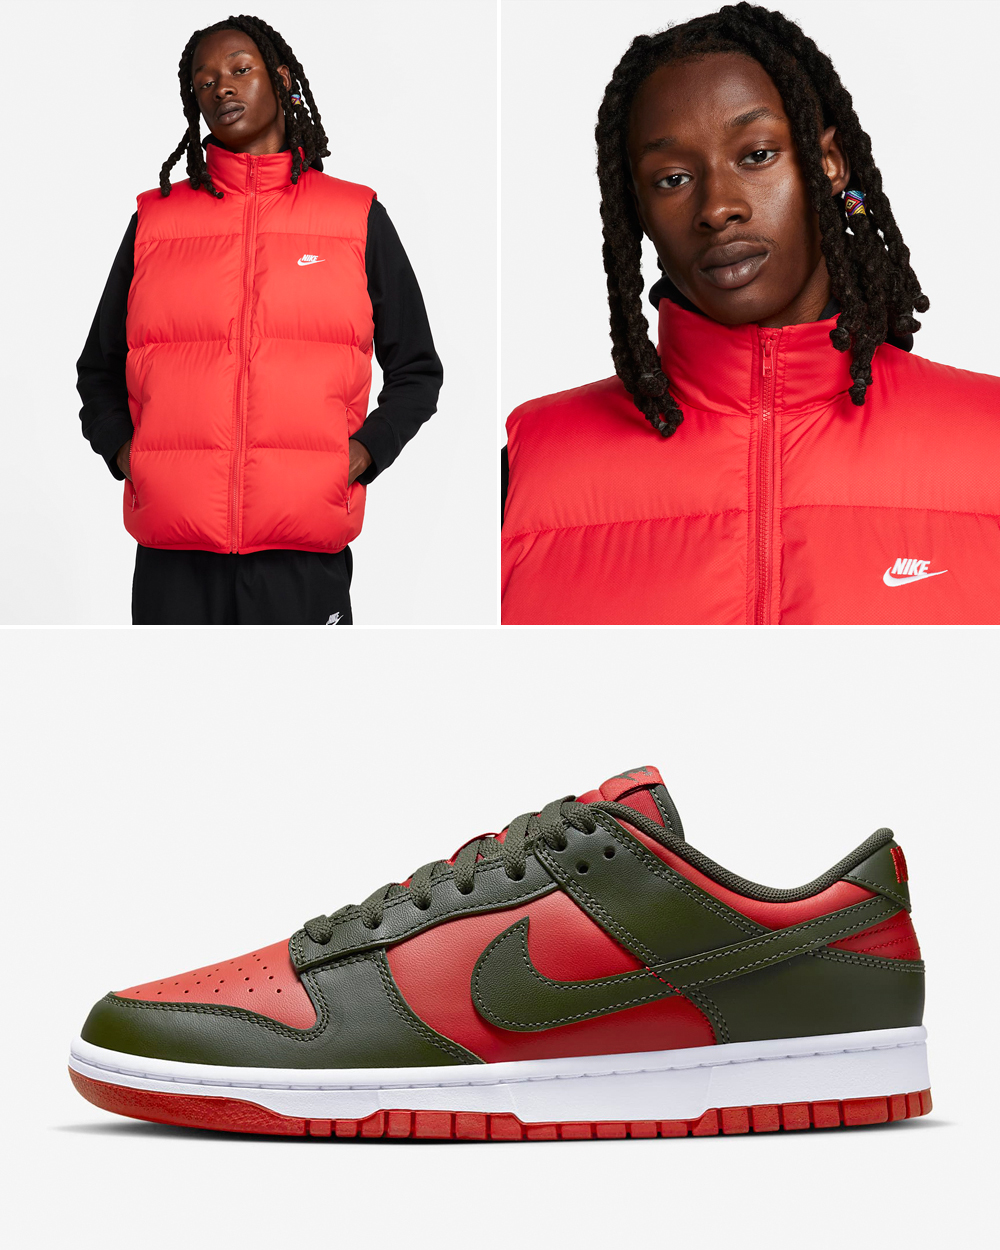 Nike-Dunk-Low-Mystic-Red-Track-Vest-Jacket-Matching-Outfit